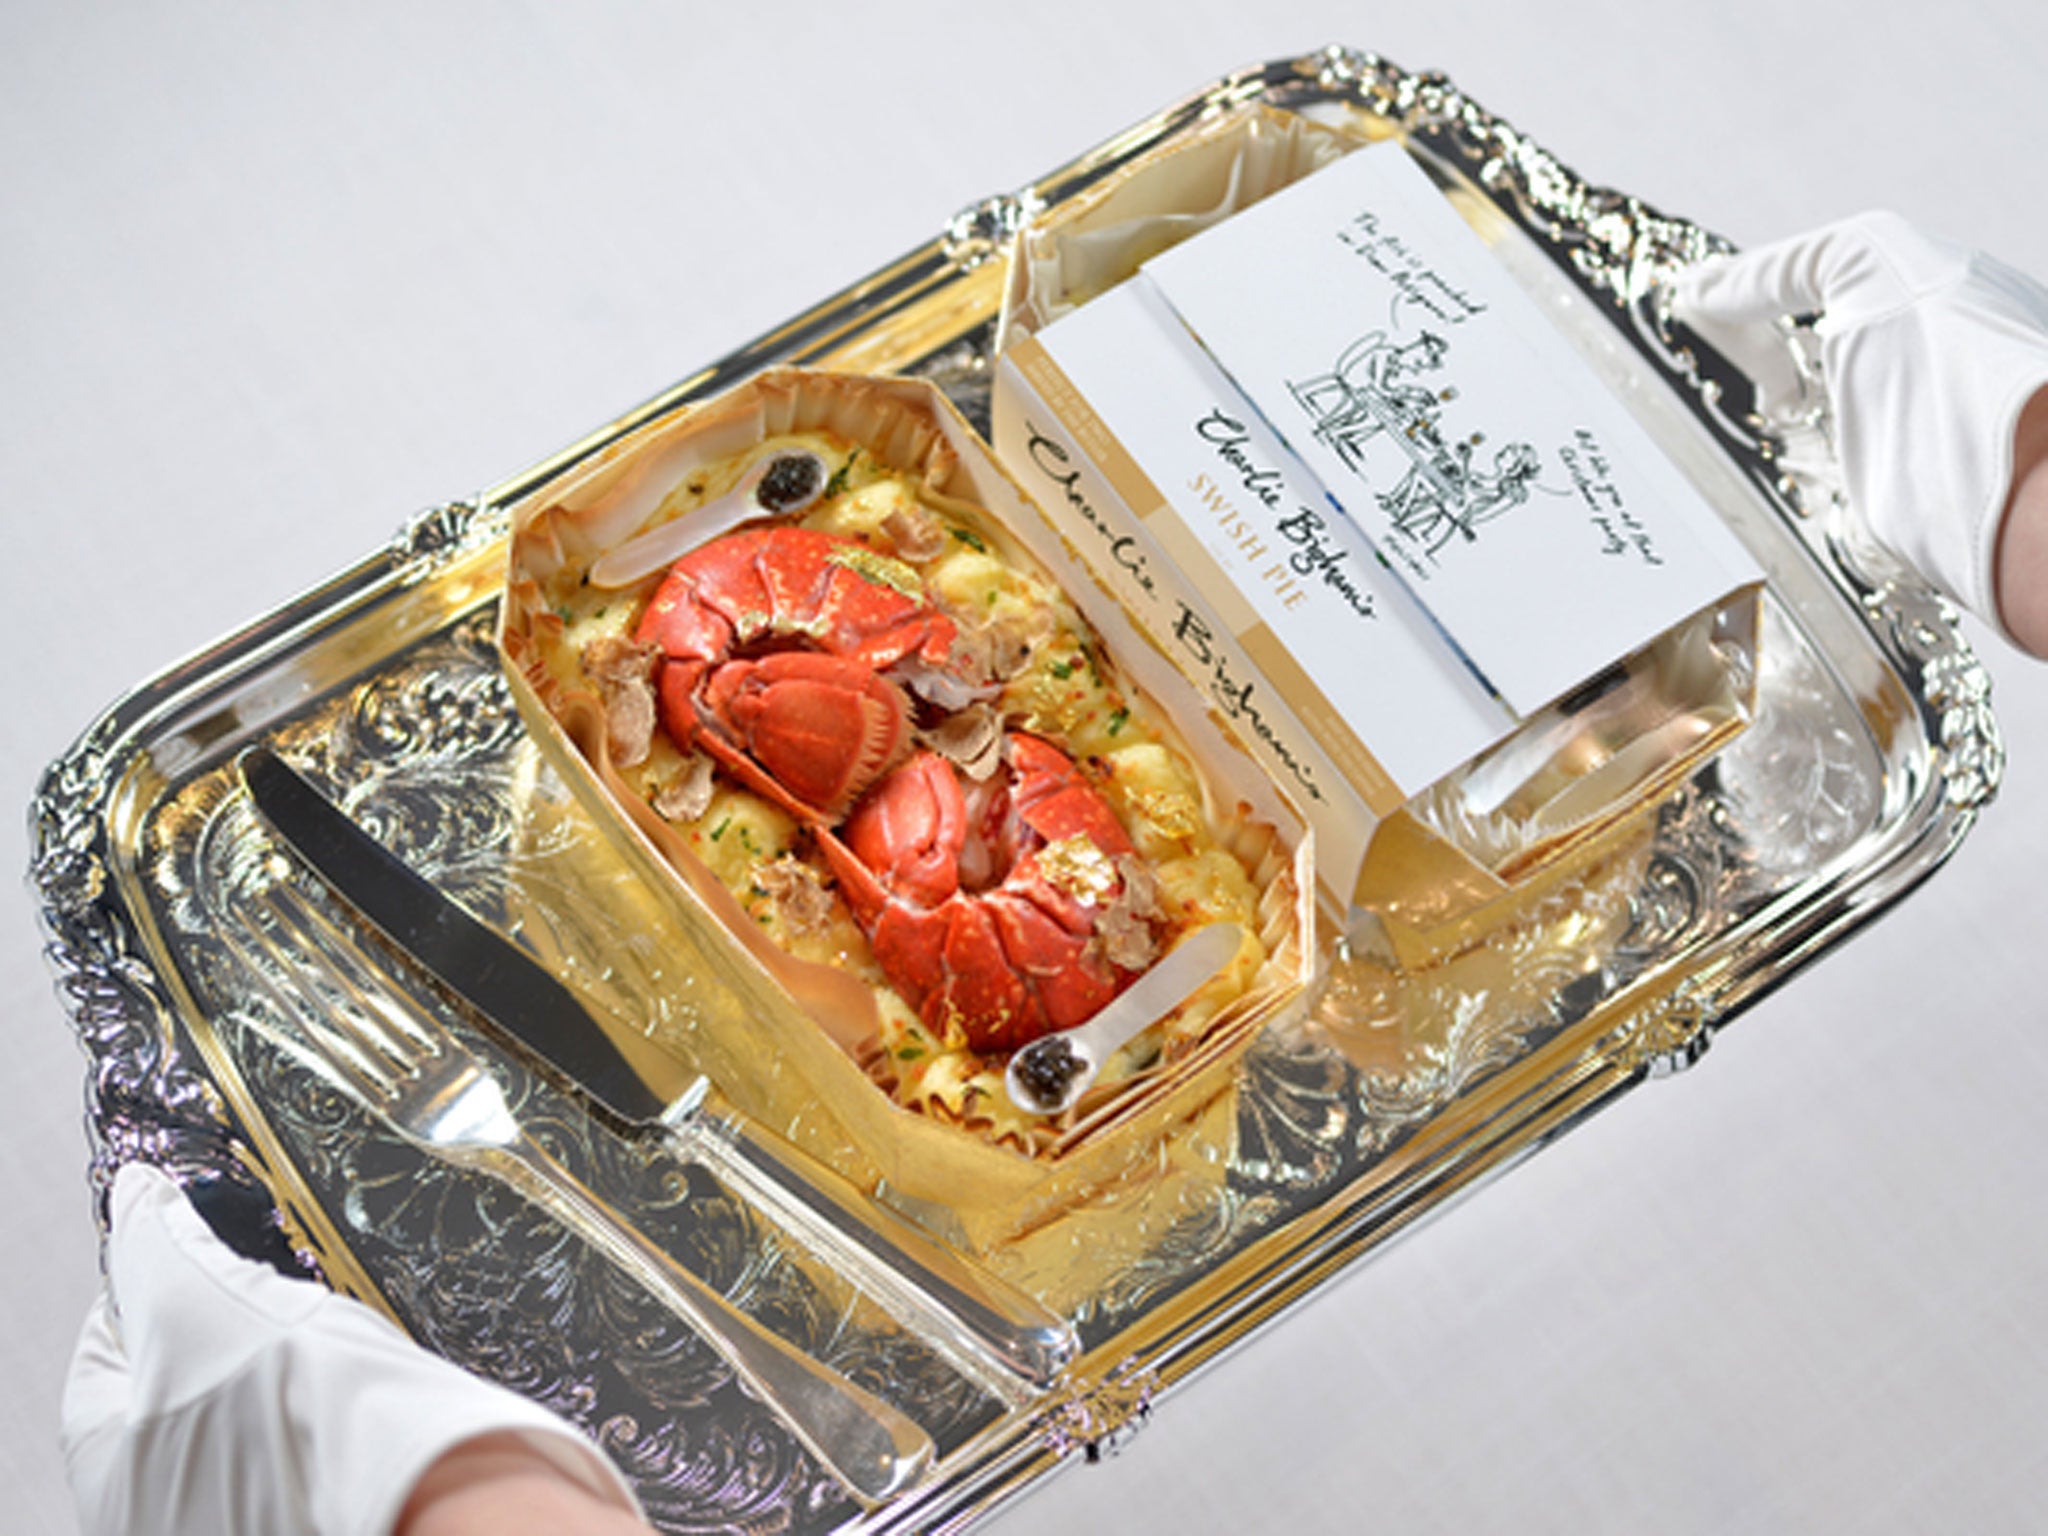 The Swish Pie costs more than £314 and is made with lobster, caviar and champagne